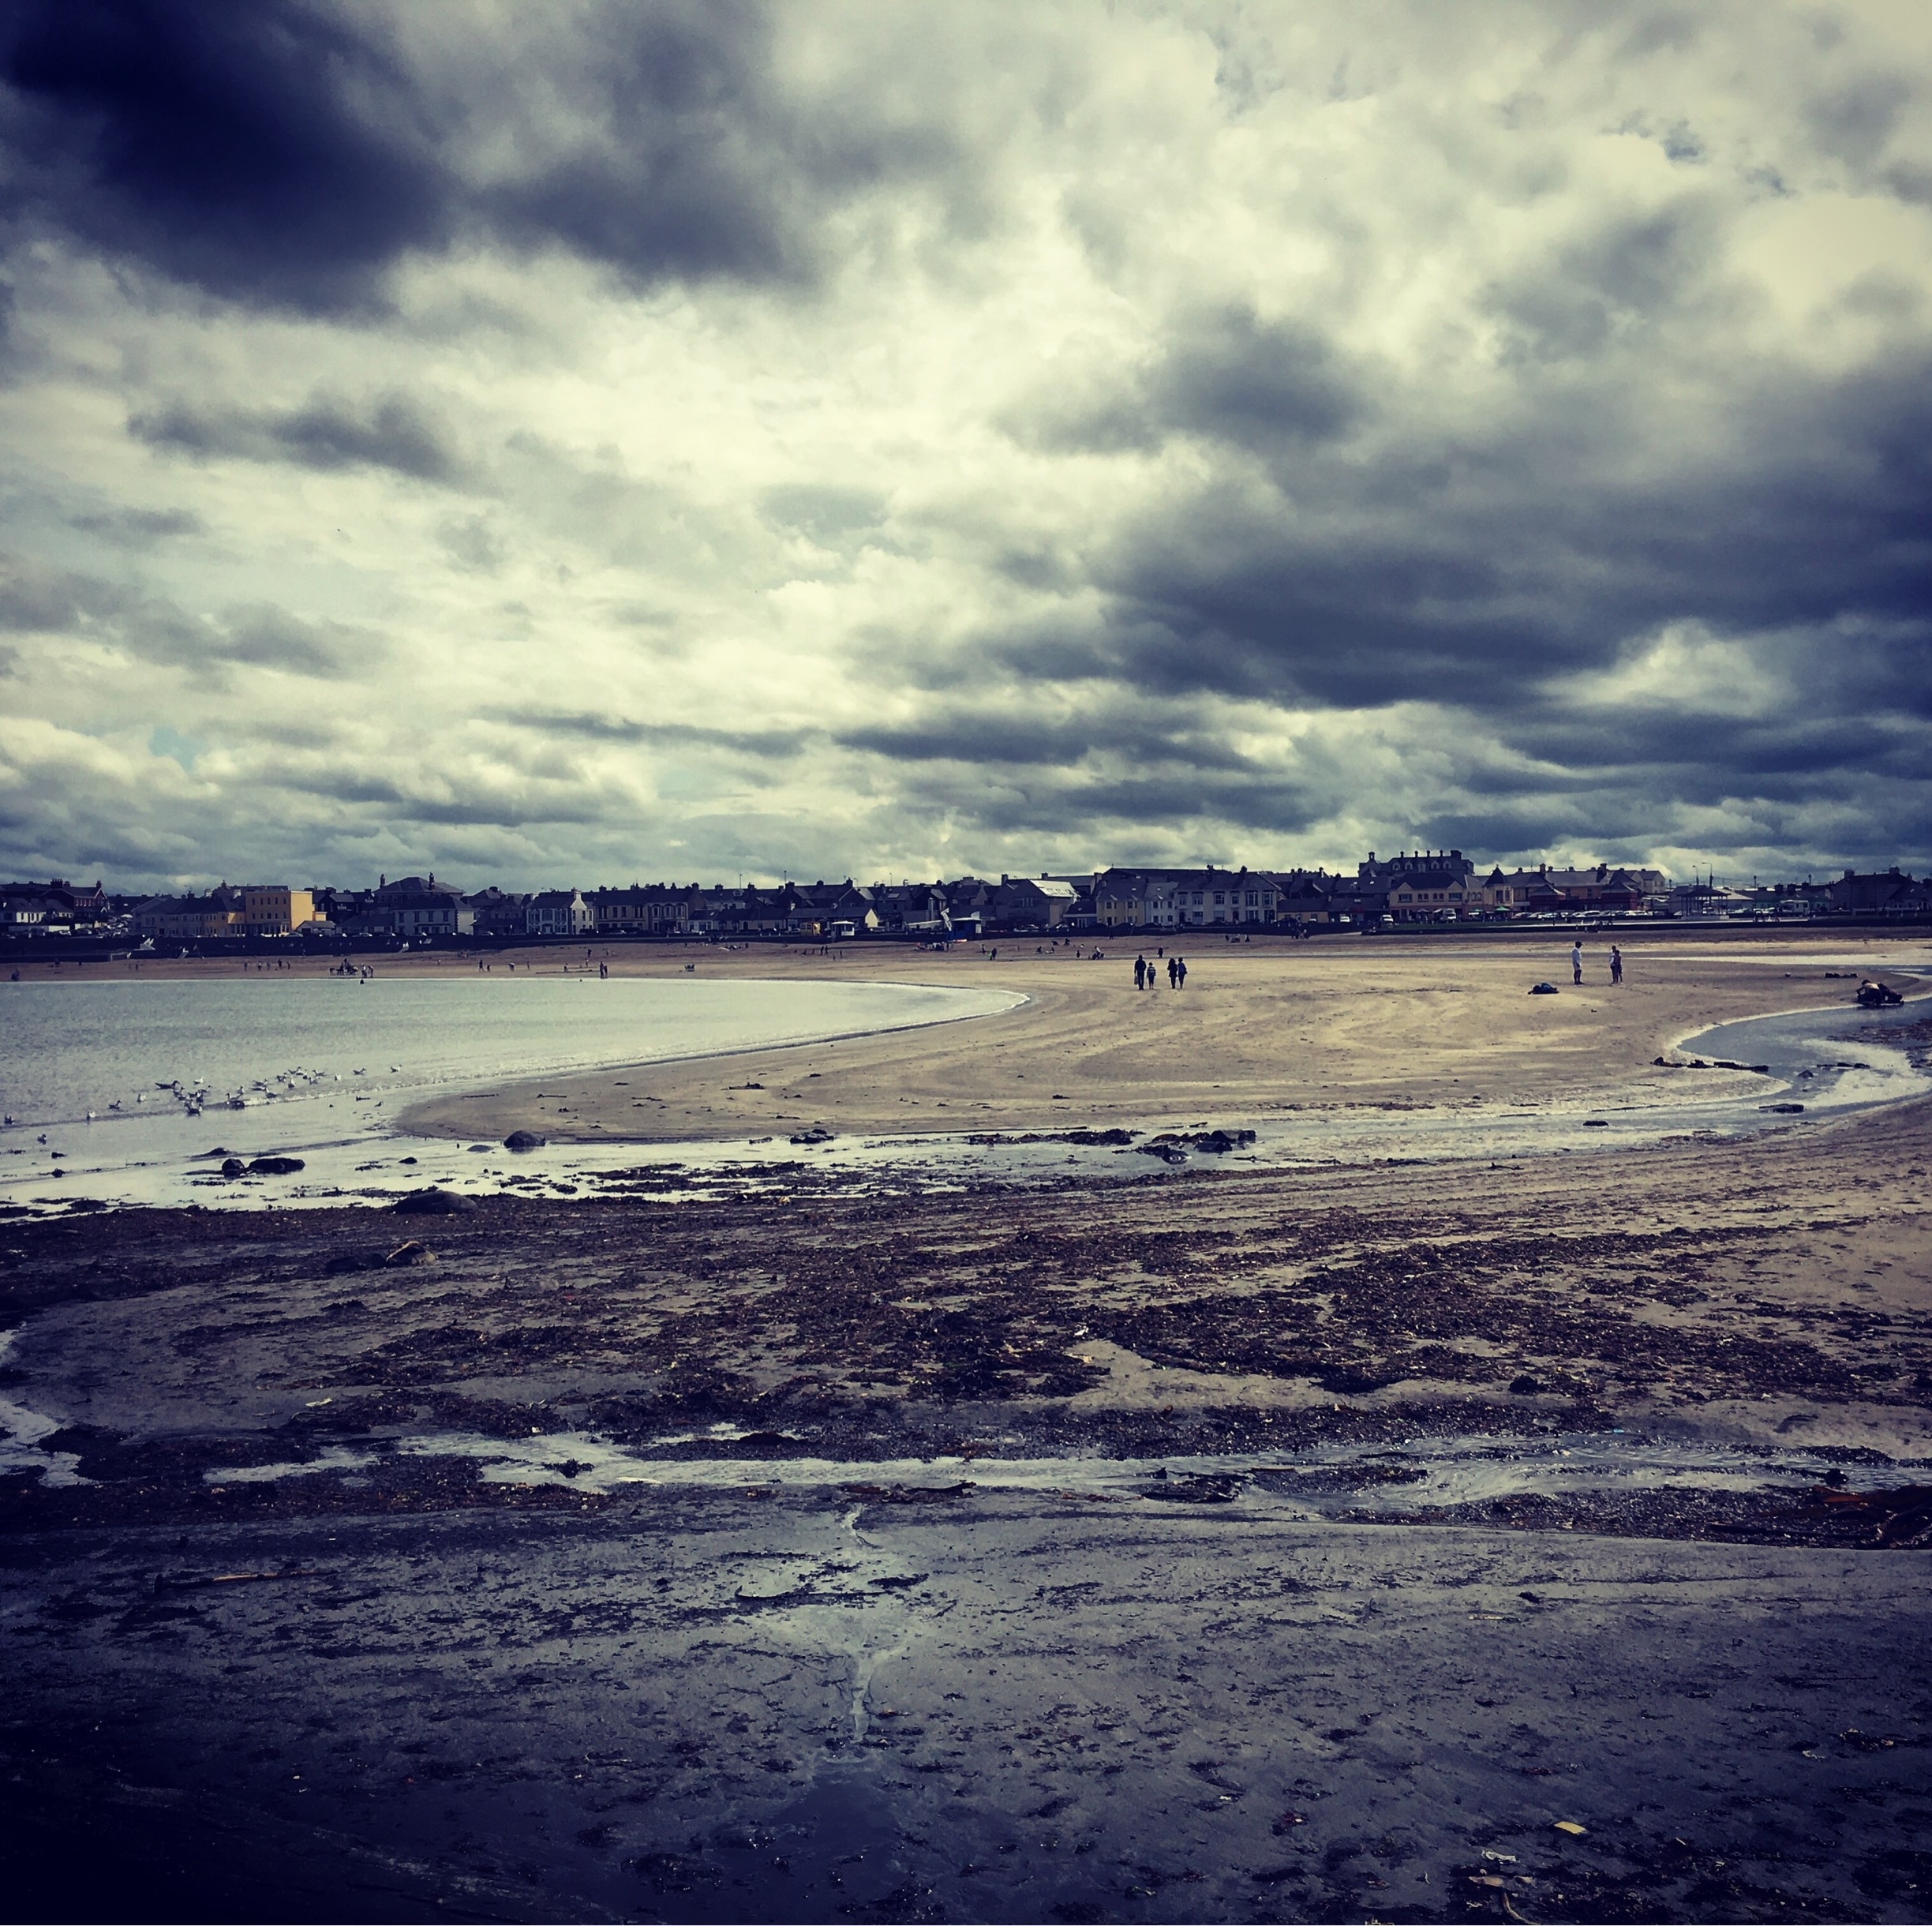 A moody unsettled day at Kilkee Beach, County Clare. 